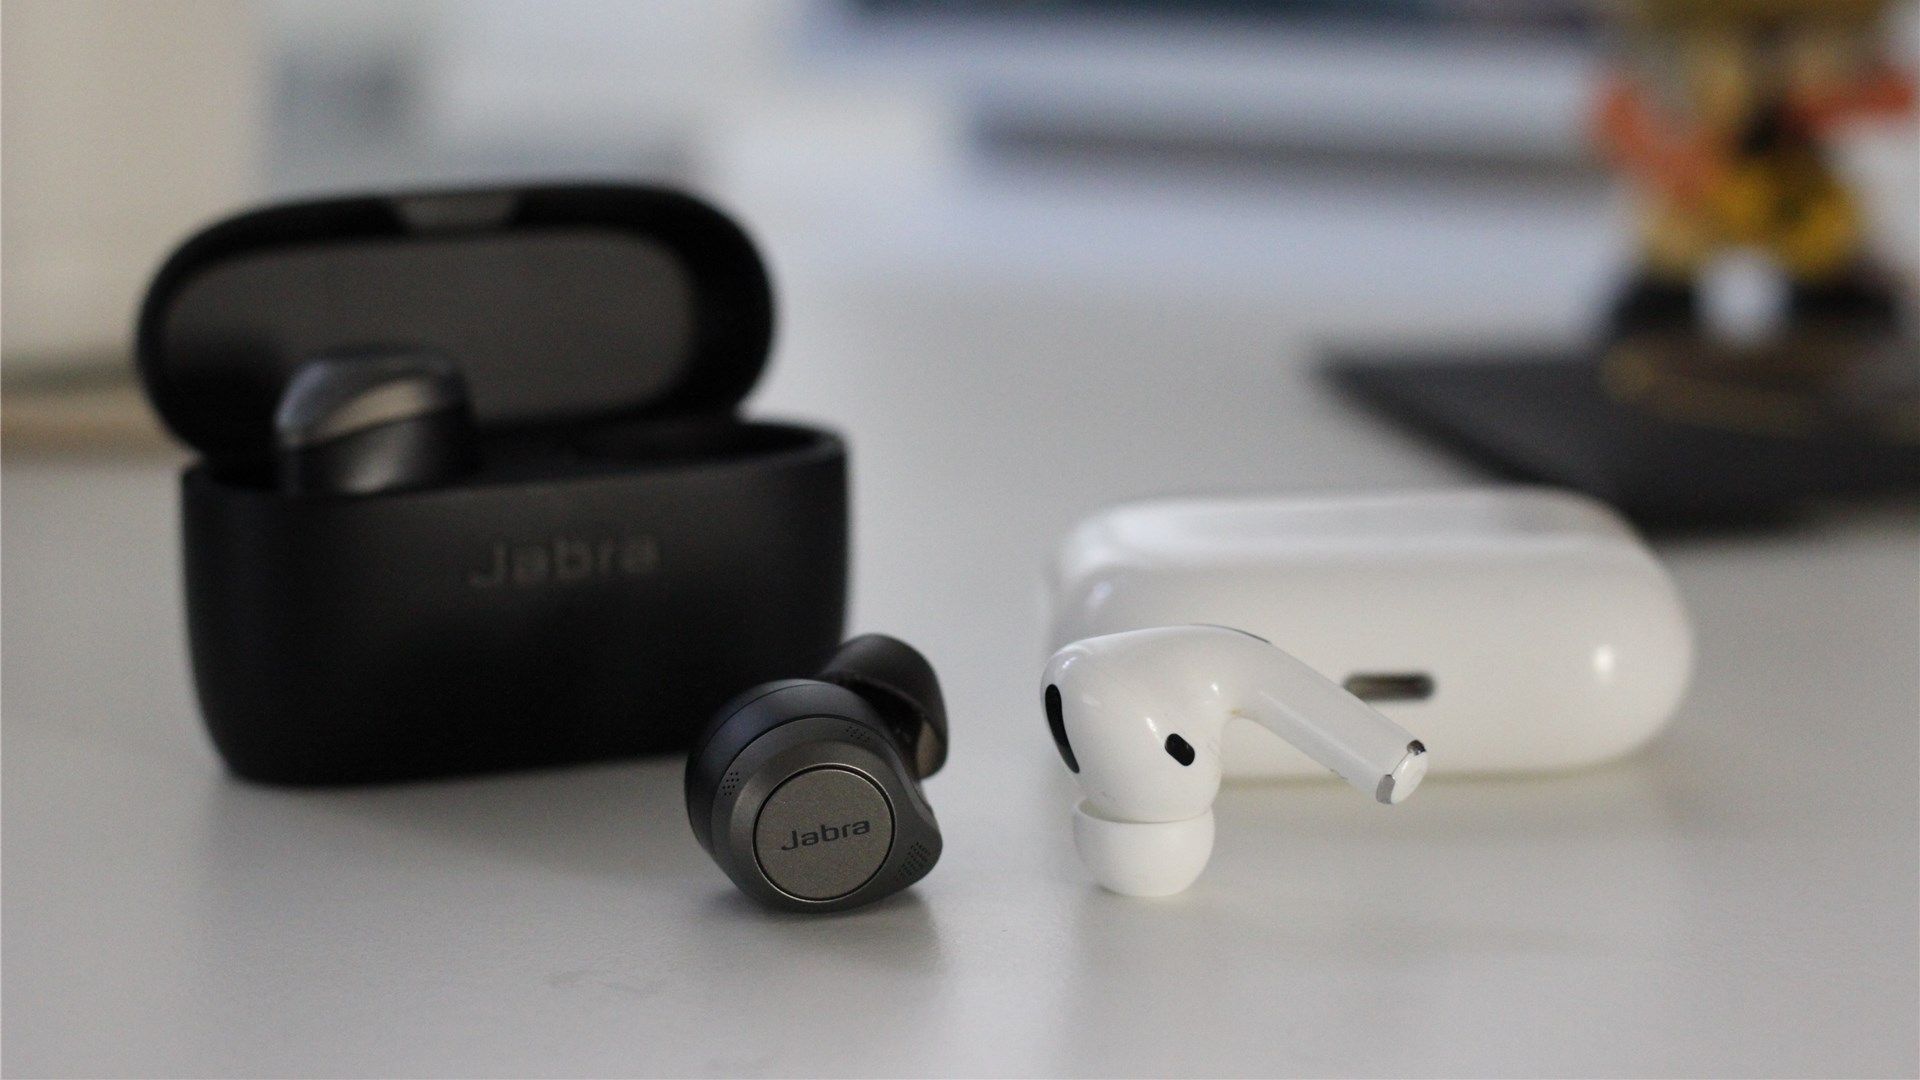 The Jabra Elite 85t compared to the AirPods Pro